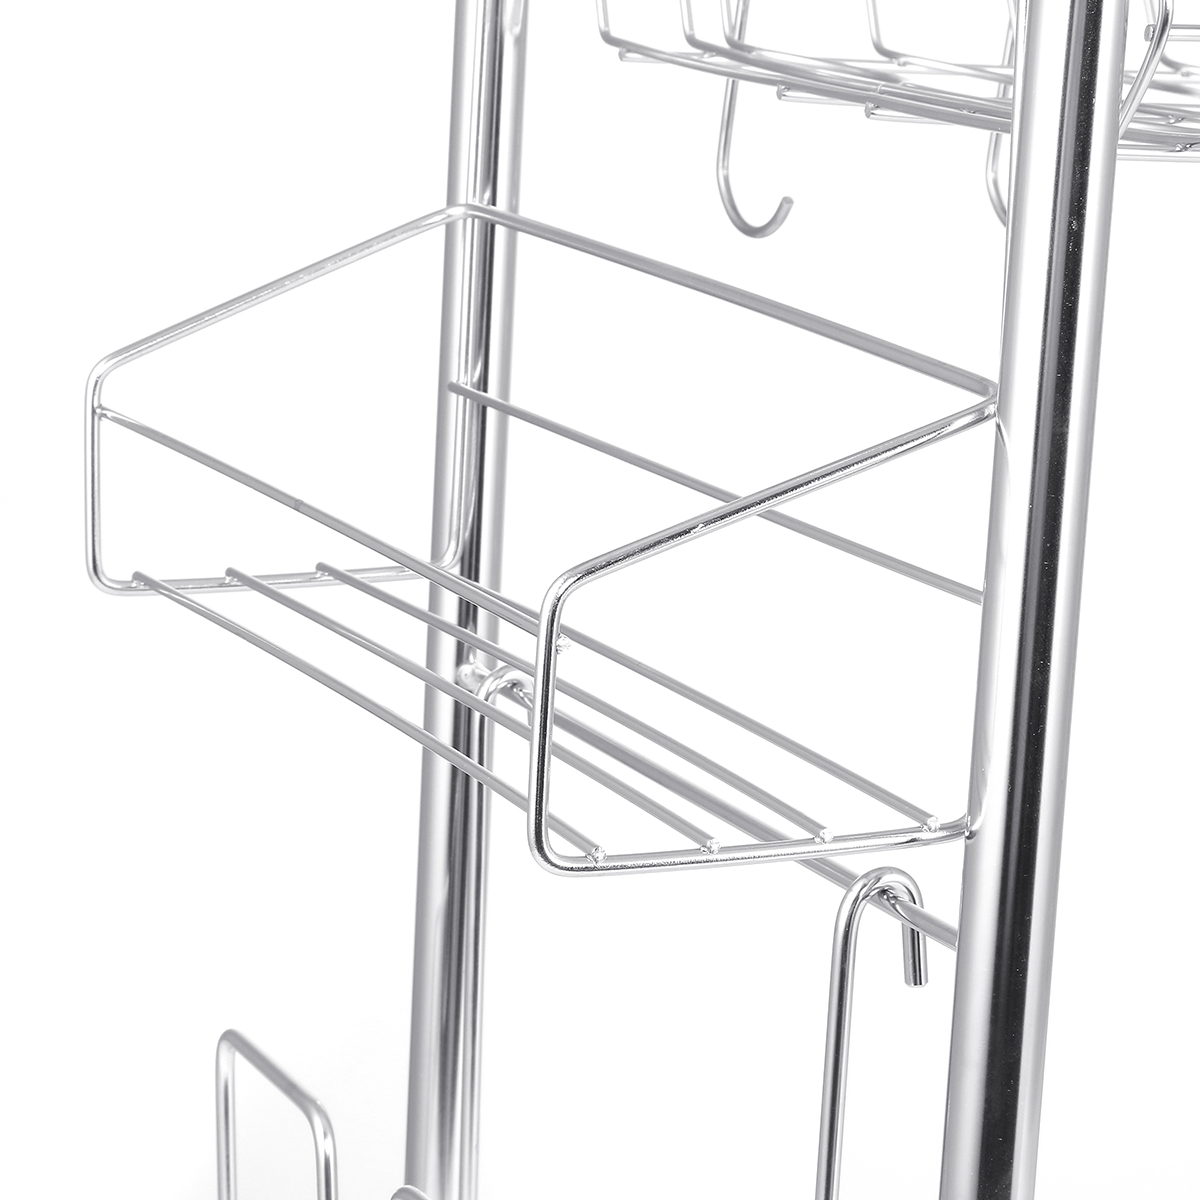 647484cm-Double-Layer-Stainless-Steel-Rack-Shelf-Storage-for-Kitchen-Dishes-Arrangement-1671407-7